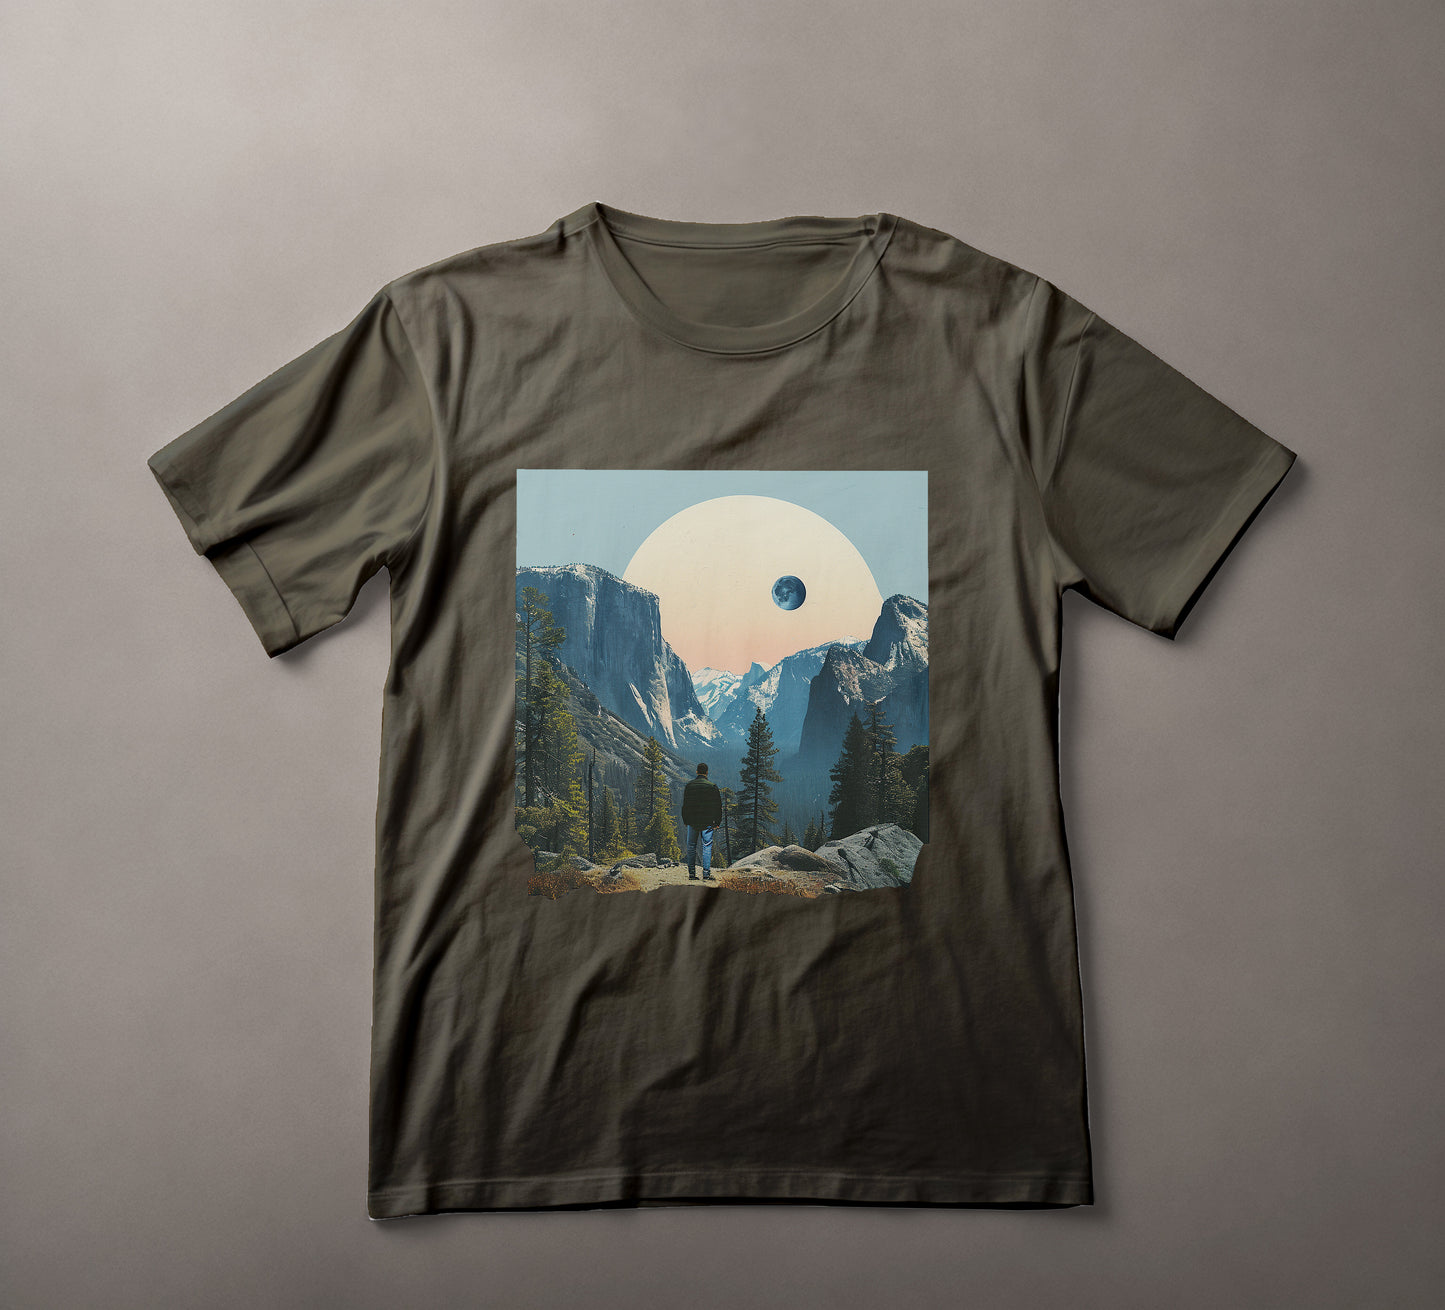 Hiker facing mountains, Yosemite National Park, solar eclipse, nature exploration, outdoor adventure tee, wilderness graphic, travel and hiking, scenic landscape, surreal nature art, environmental appreciation